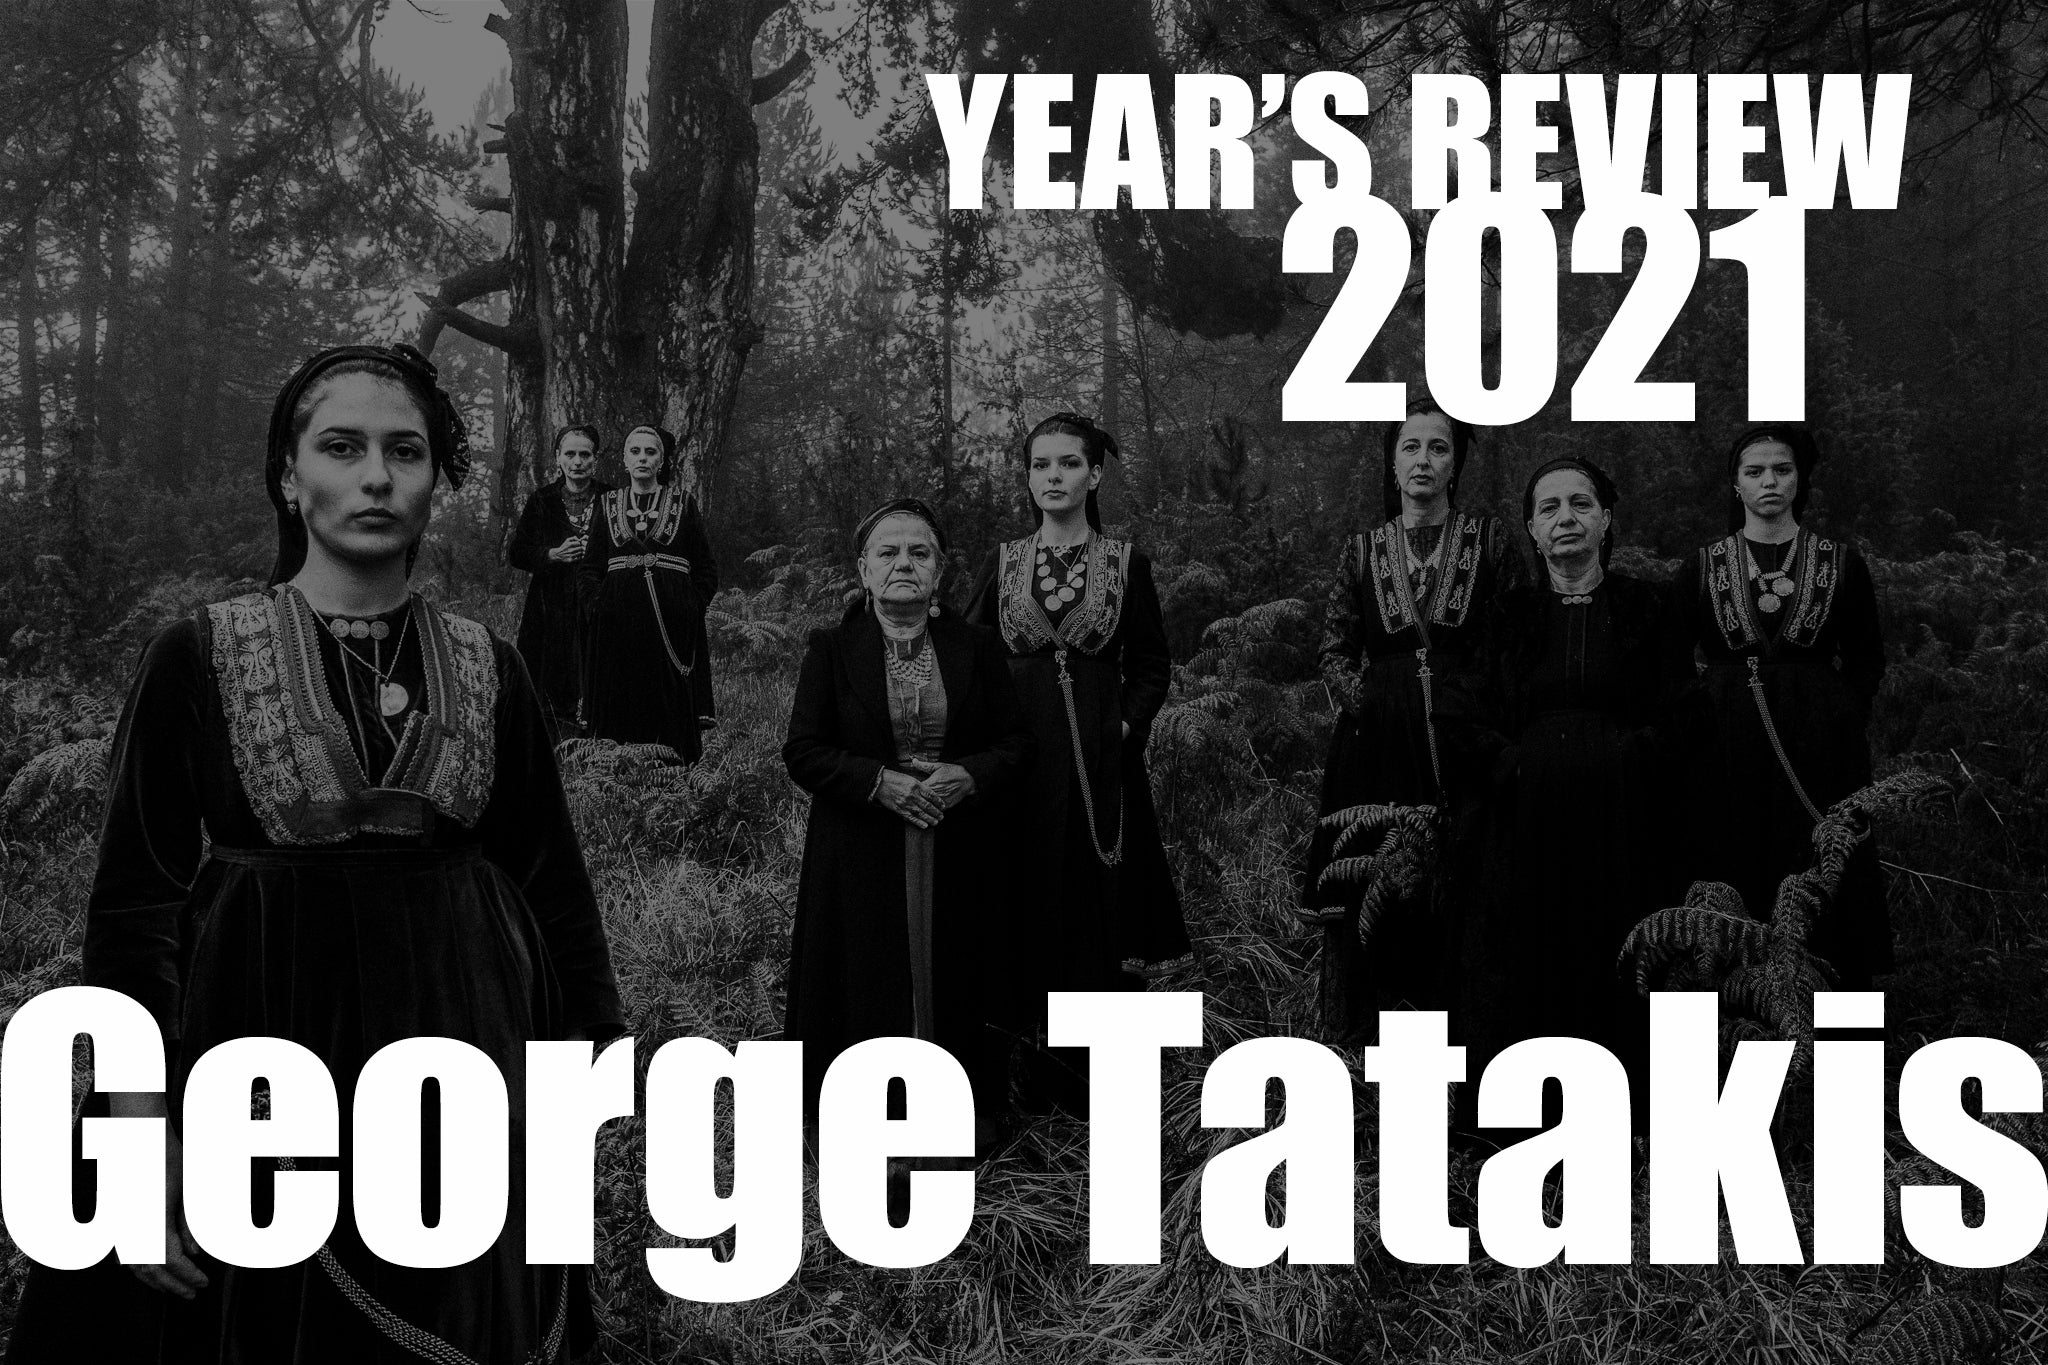 Load video: George Tatakis 2021. Photography year in review.